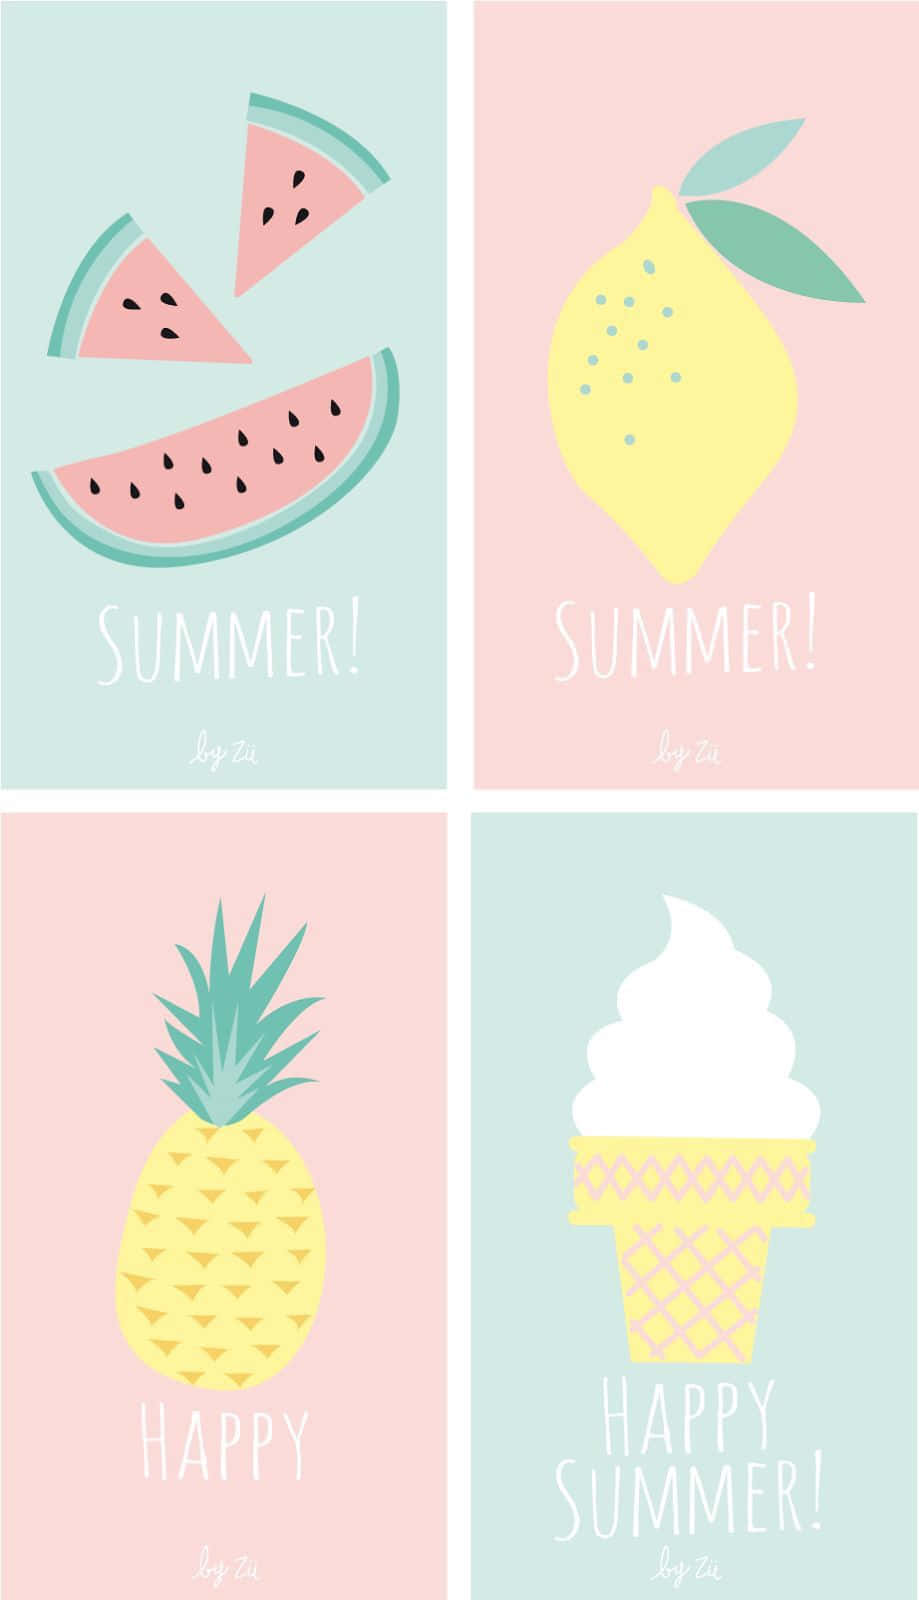 Cute Pastel Summer Collage Phone Wallpaper